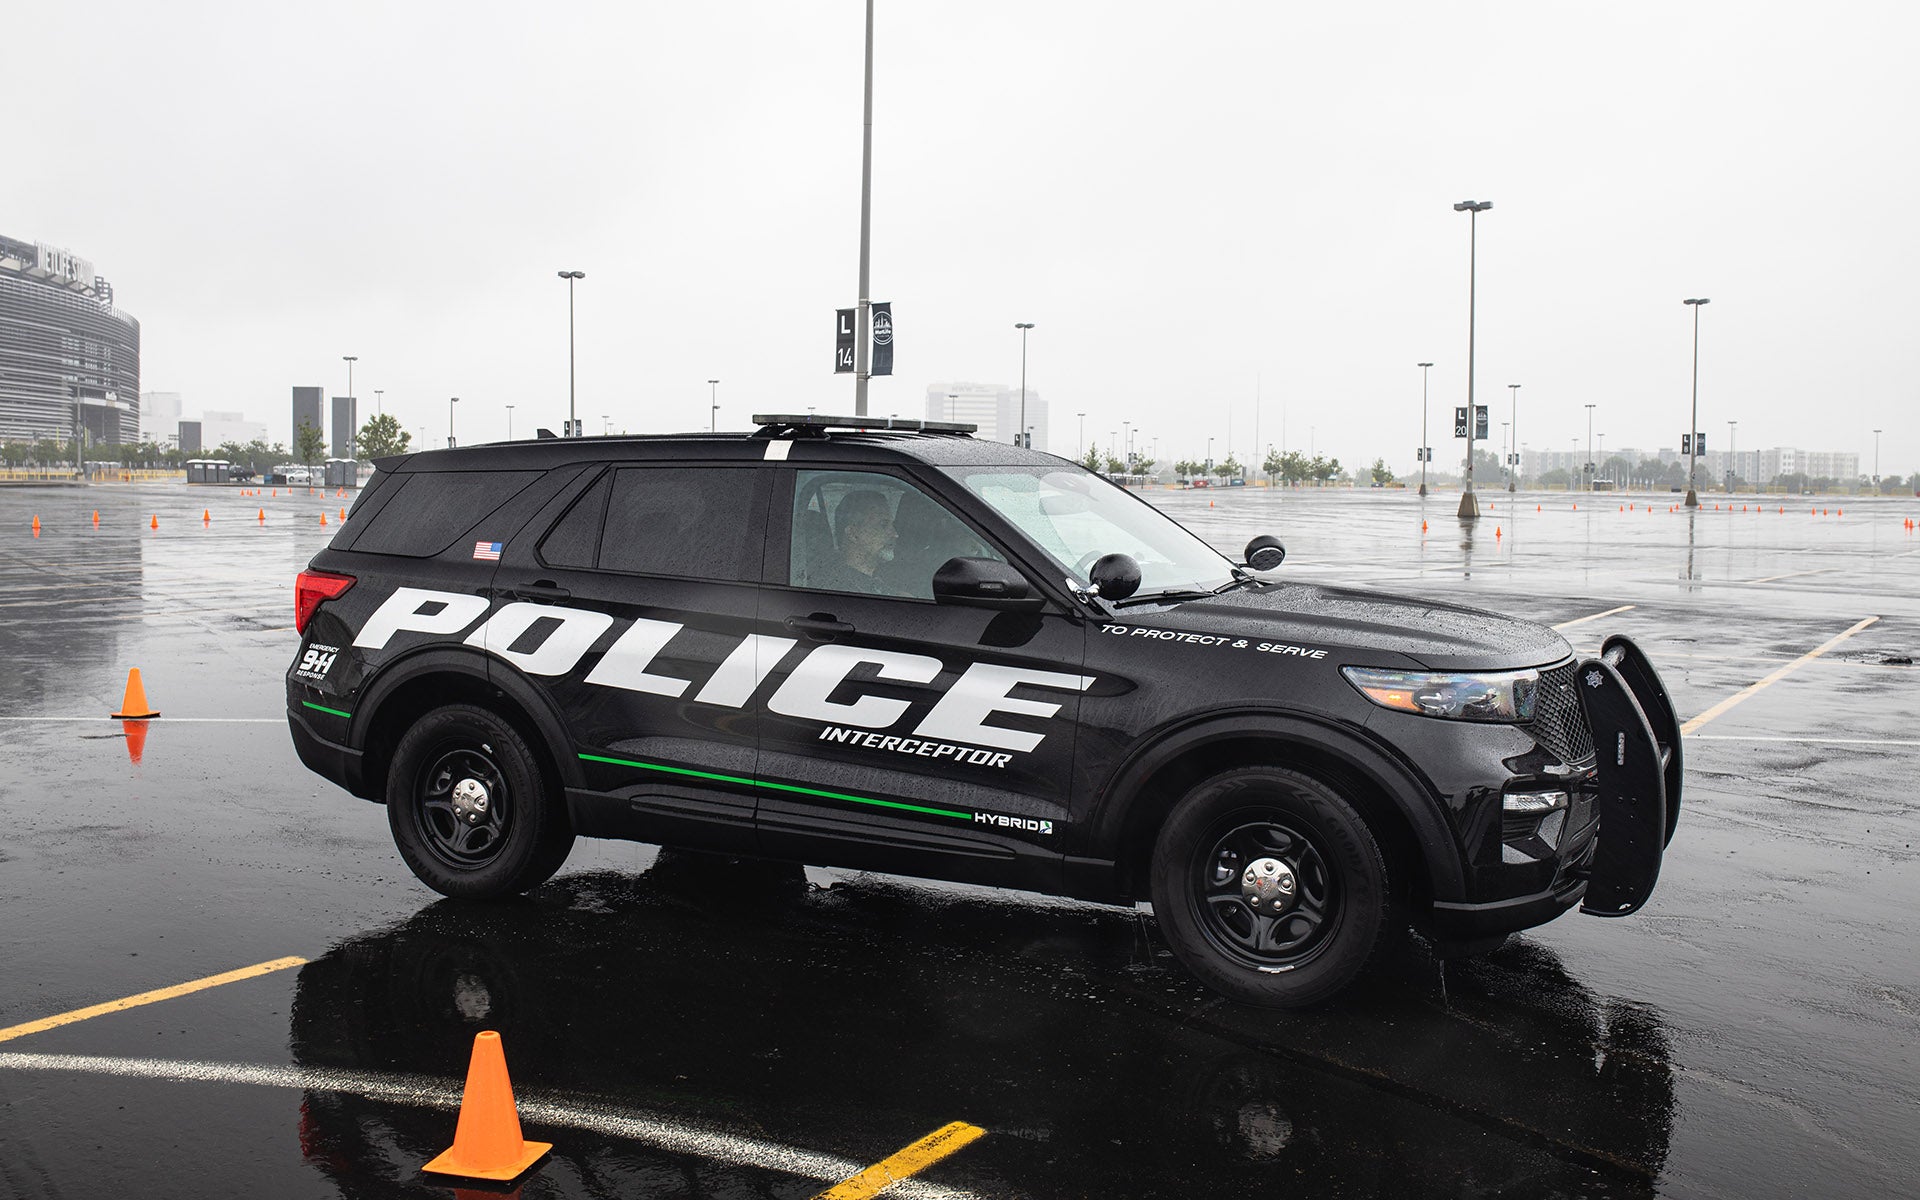 Ford Explorer Police Interceptor Utility Review Coming To A Rear View Mirror Near You